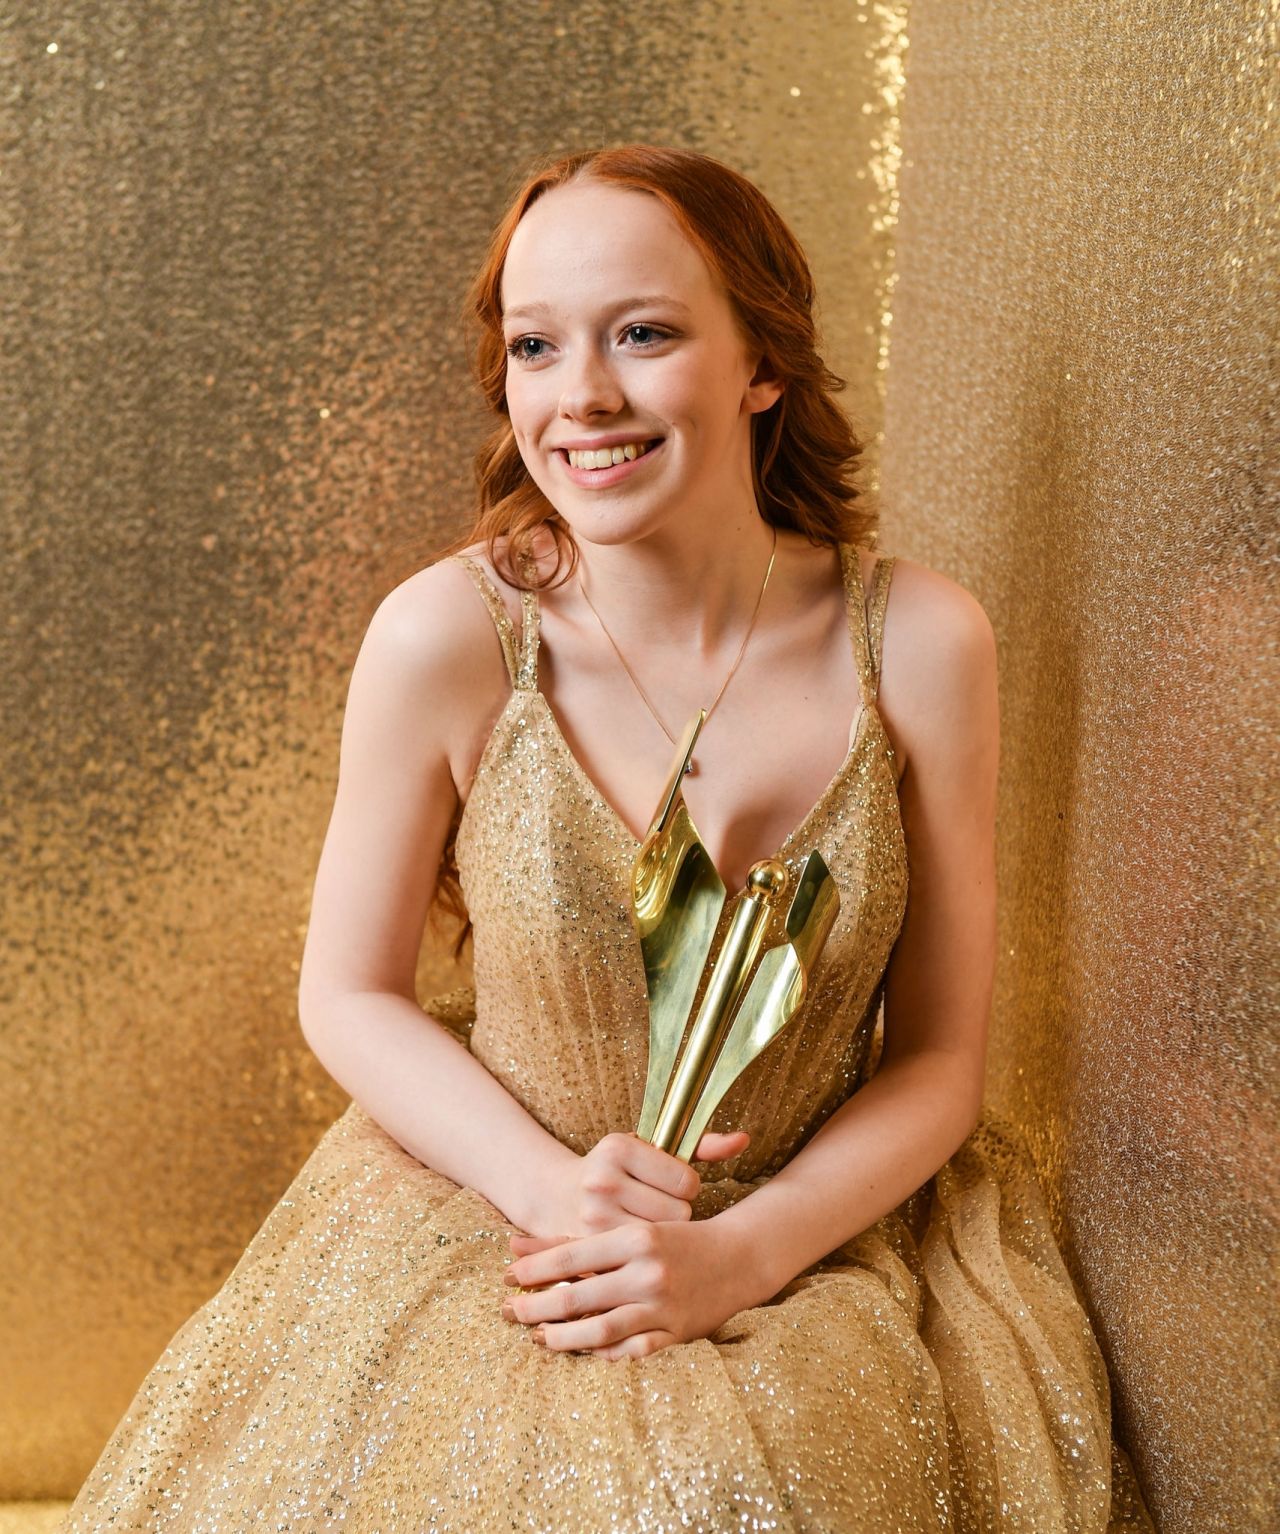 Amybeth mcnulty is popular for playing the lead role of anne shirley on the...